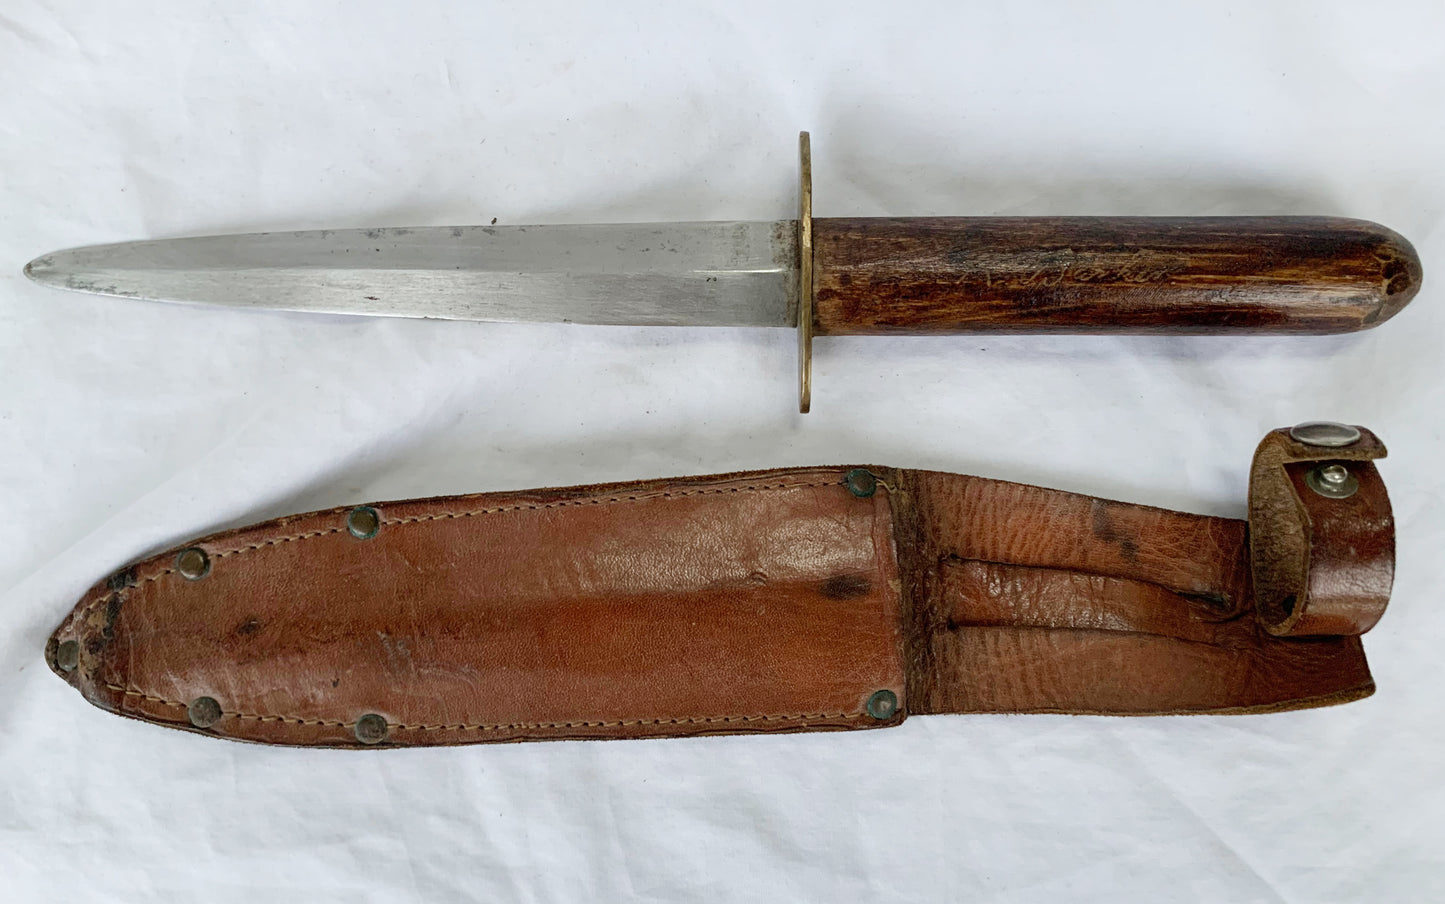 WW2 Fighting Knife owned by Captain Ken Barker 44 Rhodesian Squadron - 30 Missions to Europe.